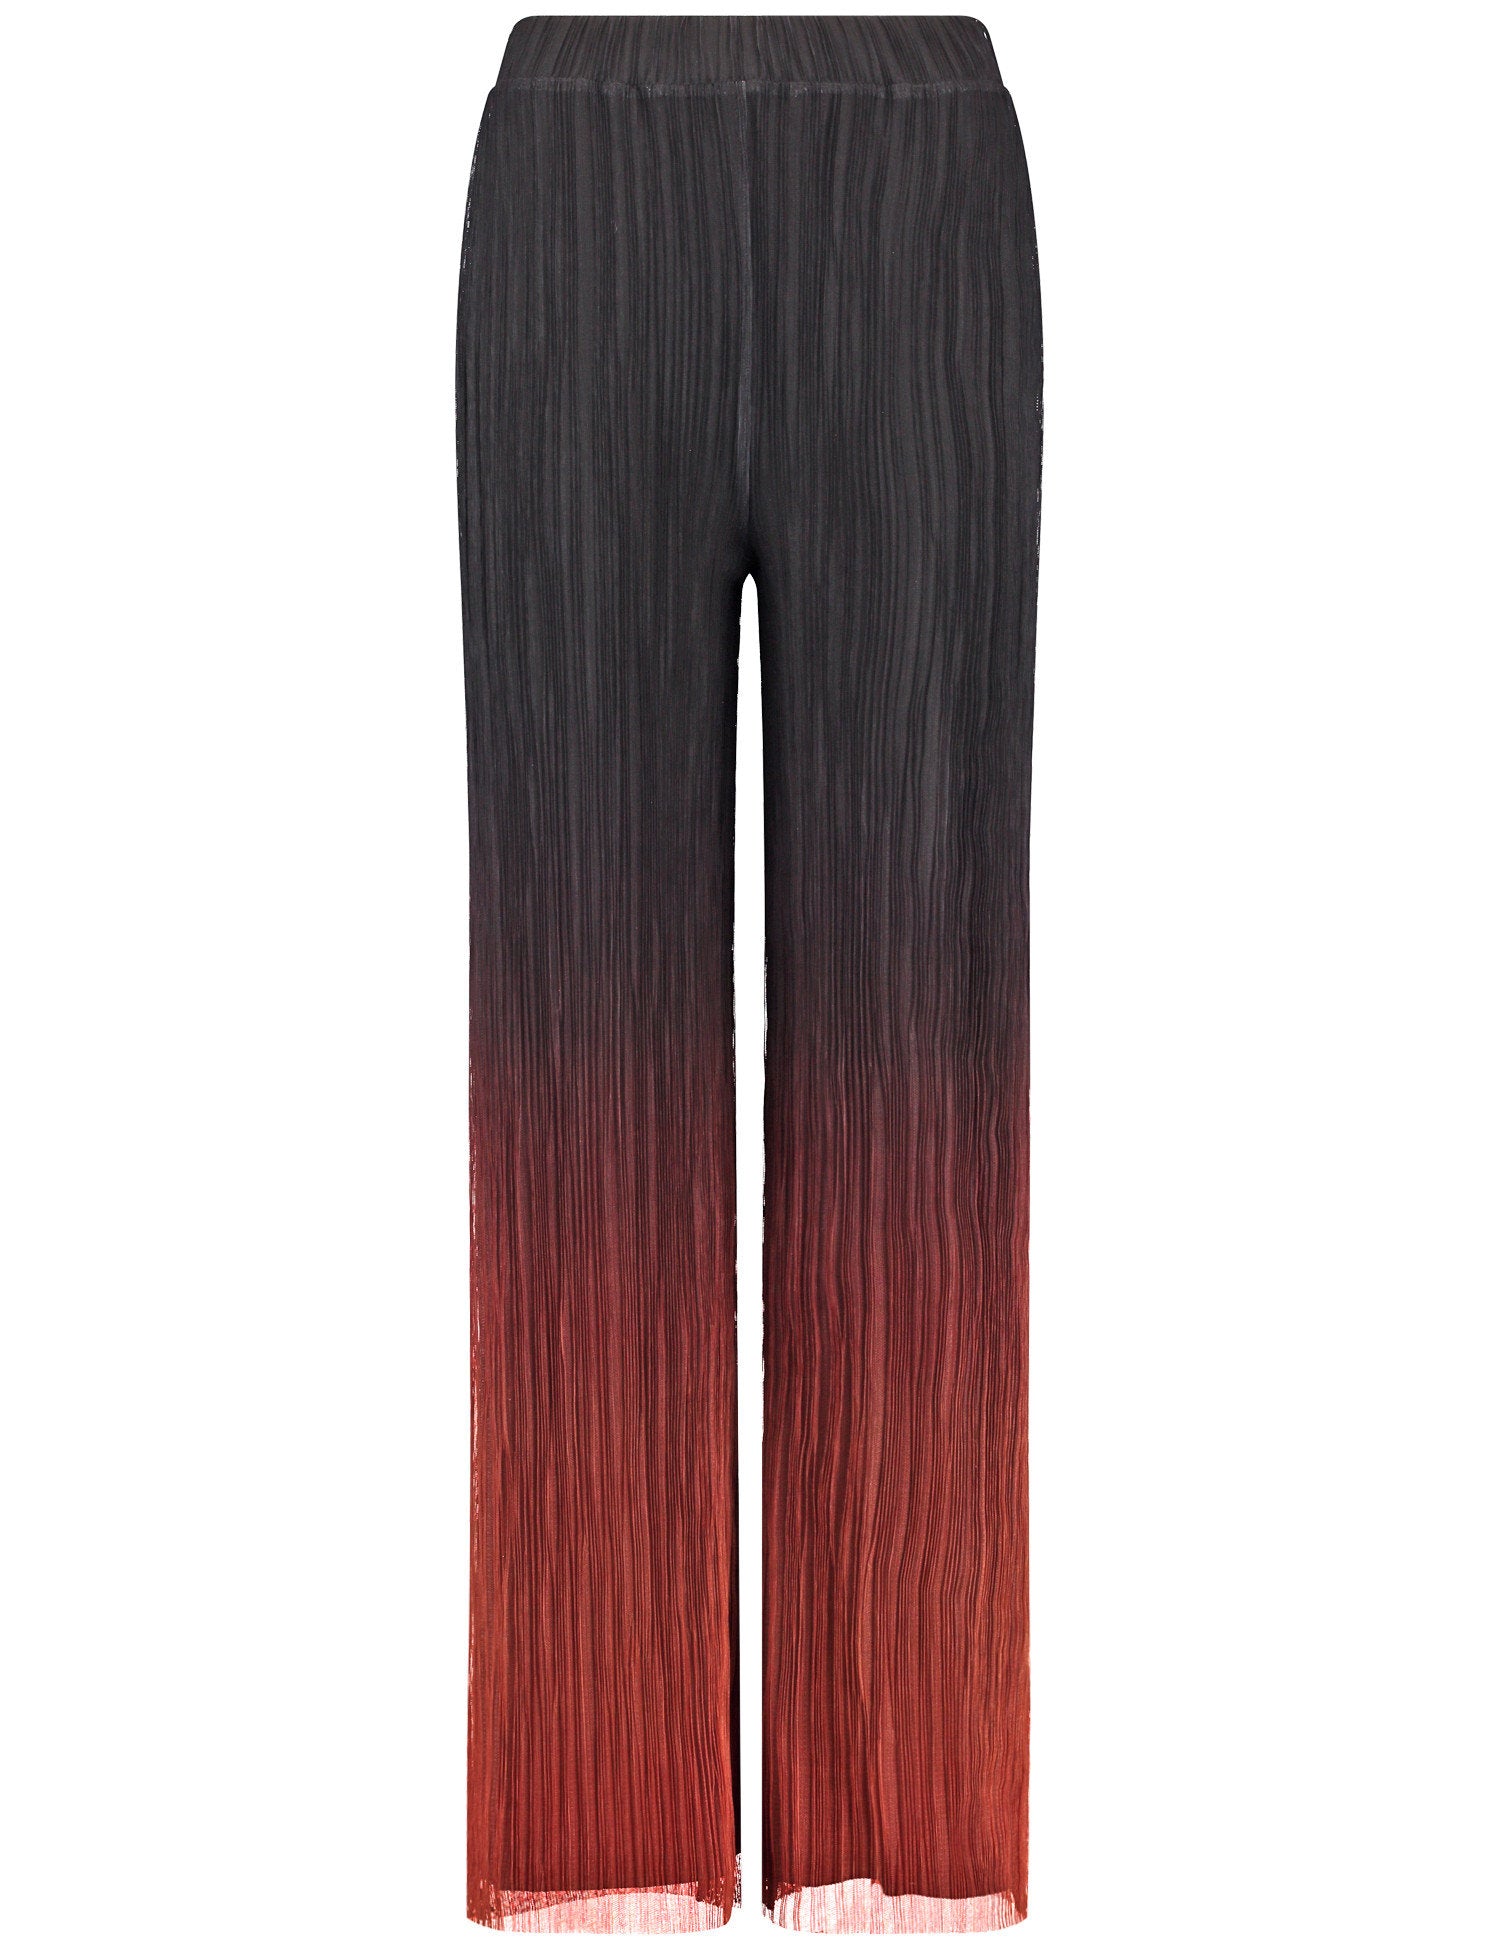 Pleated Trousers With Colour Graduation_521302-16237_1102_07